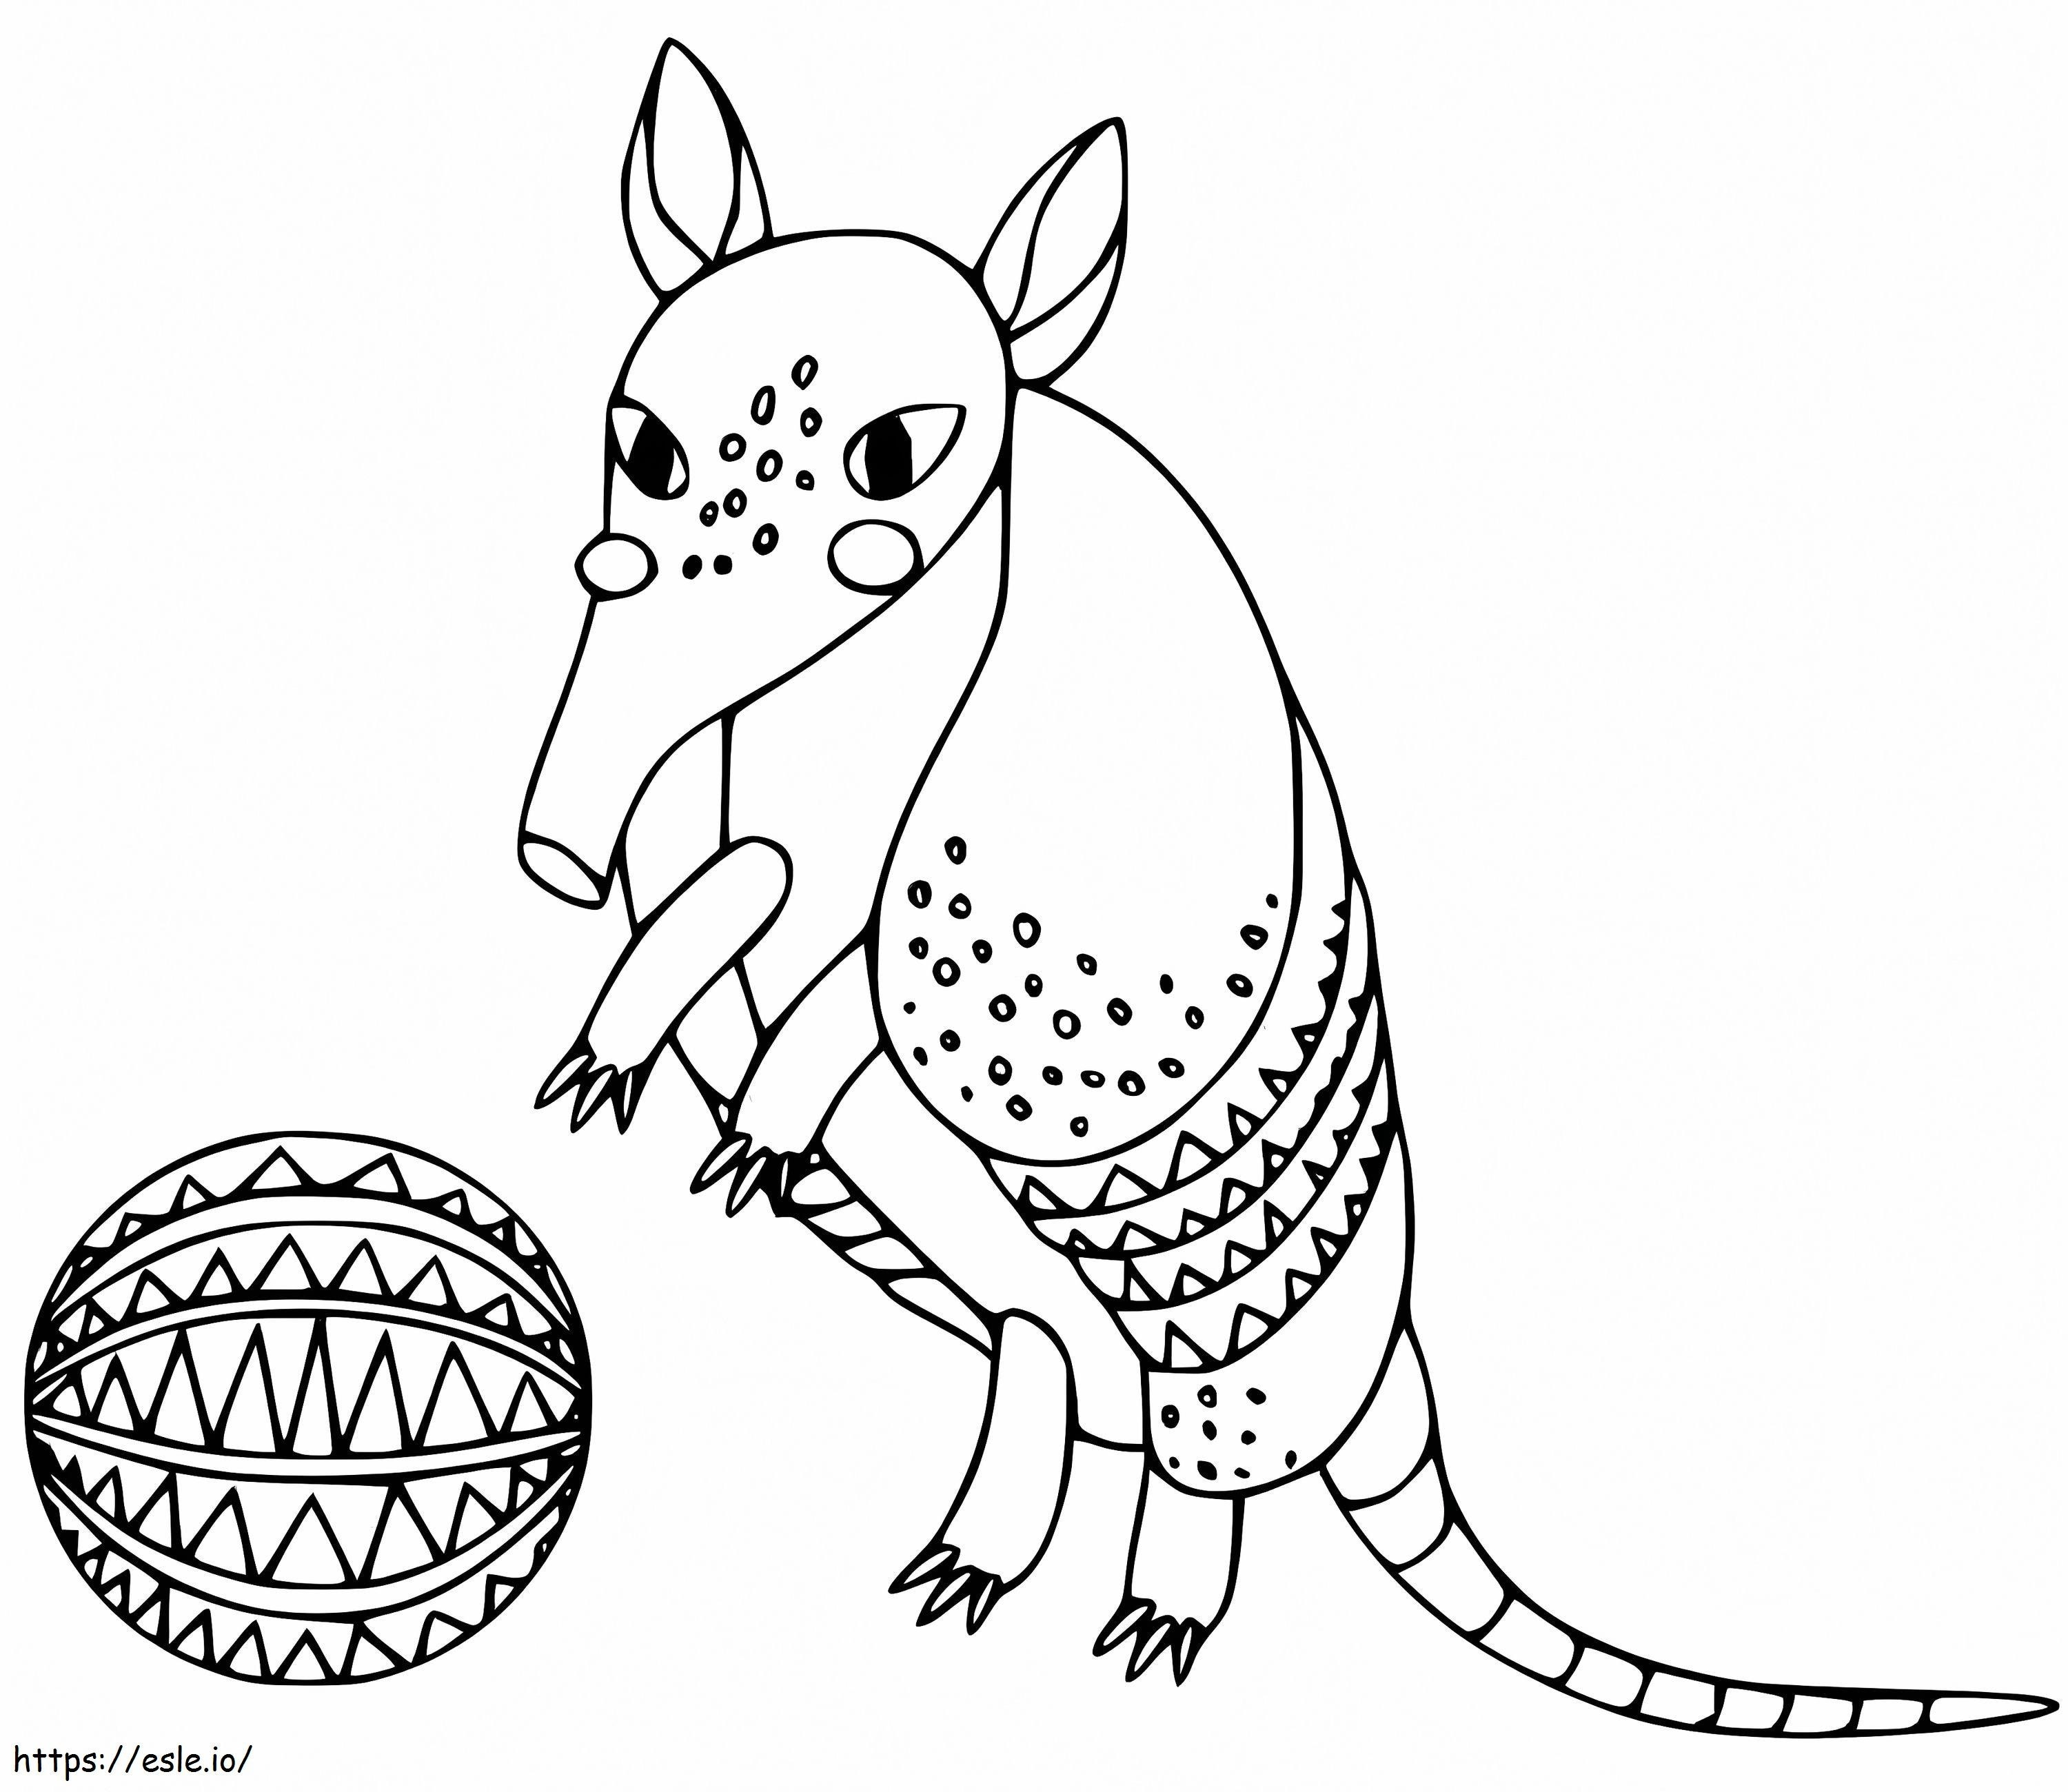 Armadillo And Ball coloring page